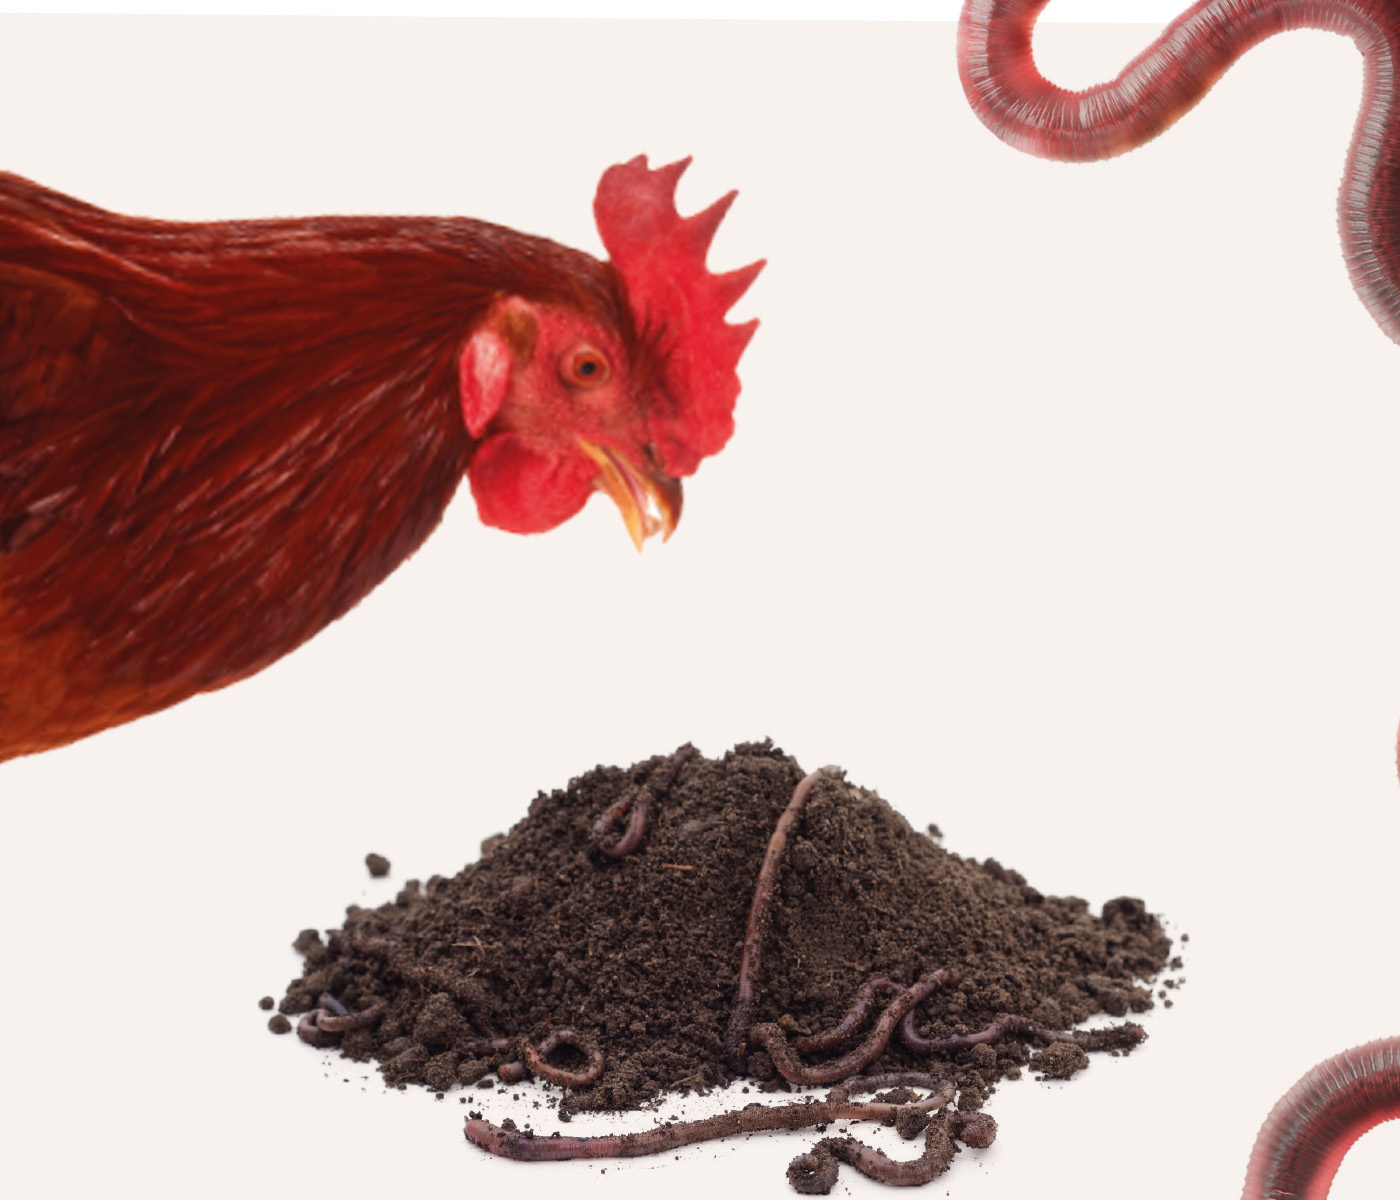 Worm Meal as an Alternative Protein Source in Laying Hen Diets